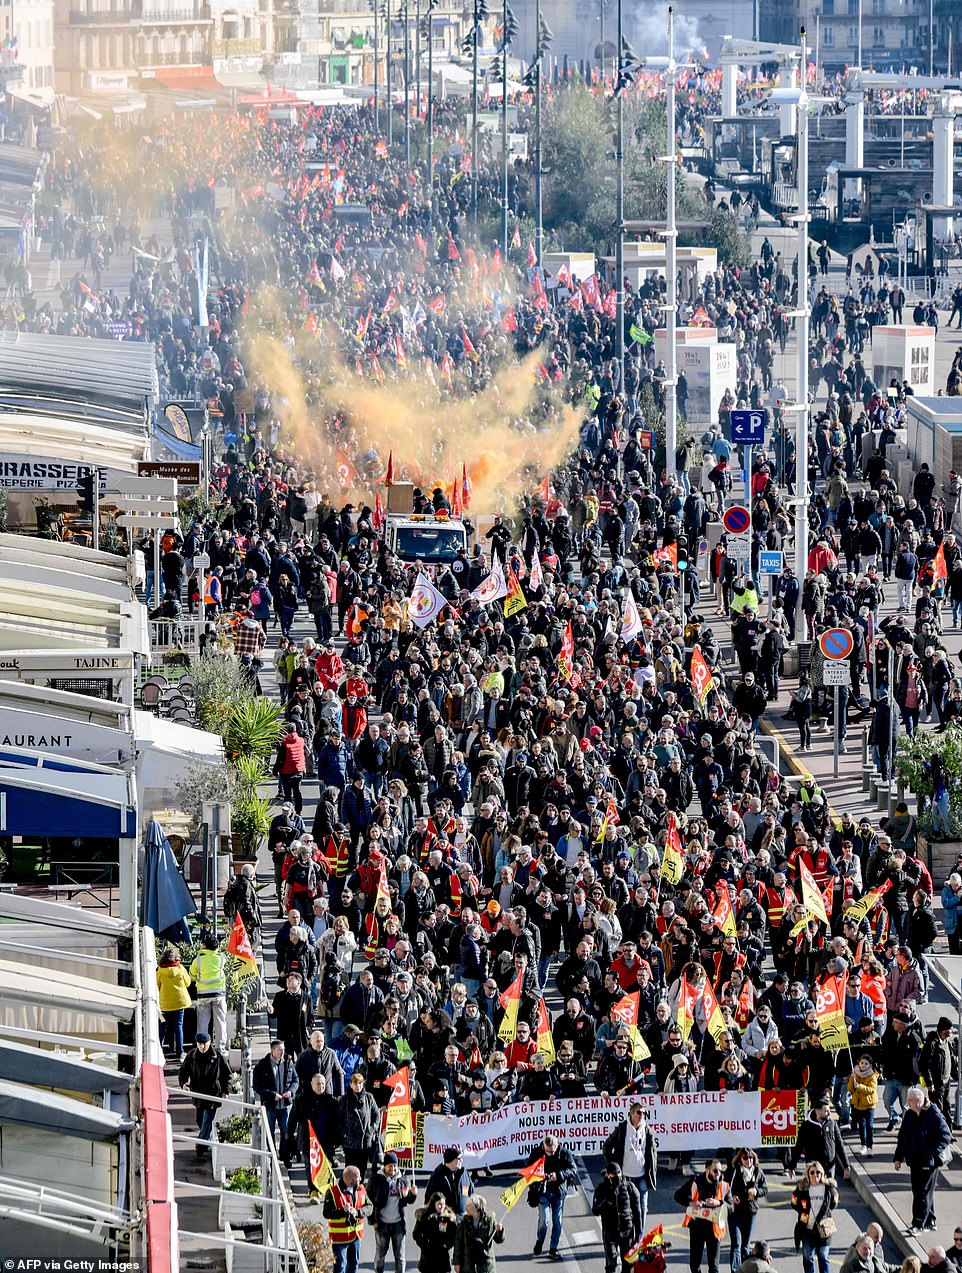 People take part in a demonstration in Marseille on January 31, 2023 as part of a nationwide day of strikes and rallies for the second time in a month to protest a planned reform to boost the age of retirement from 62 to 64